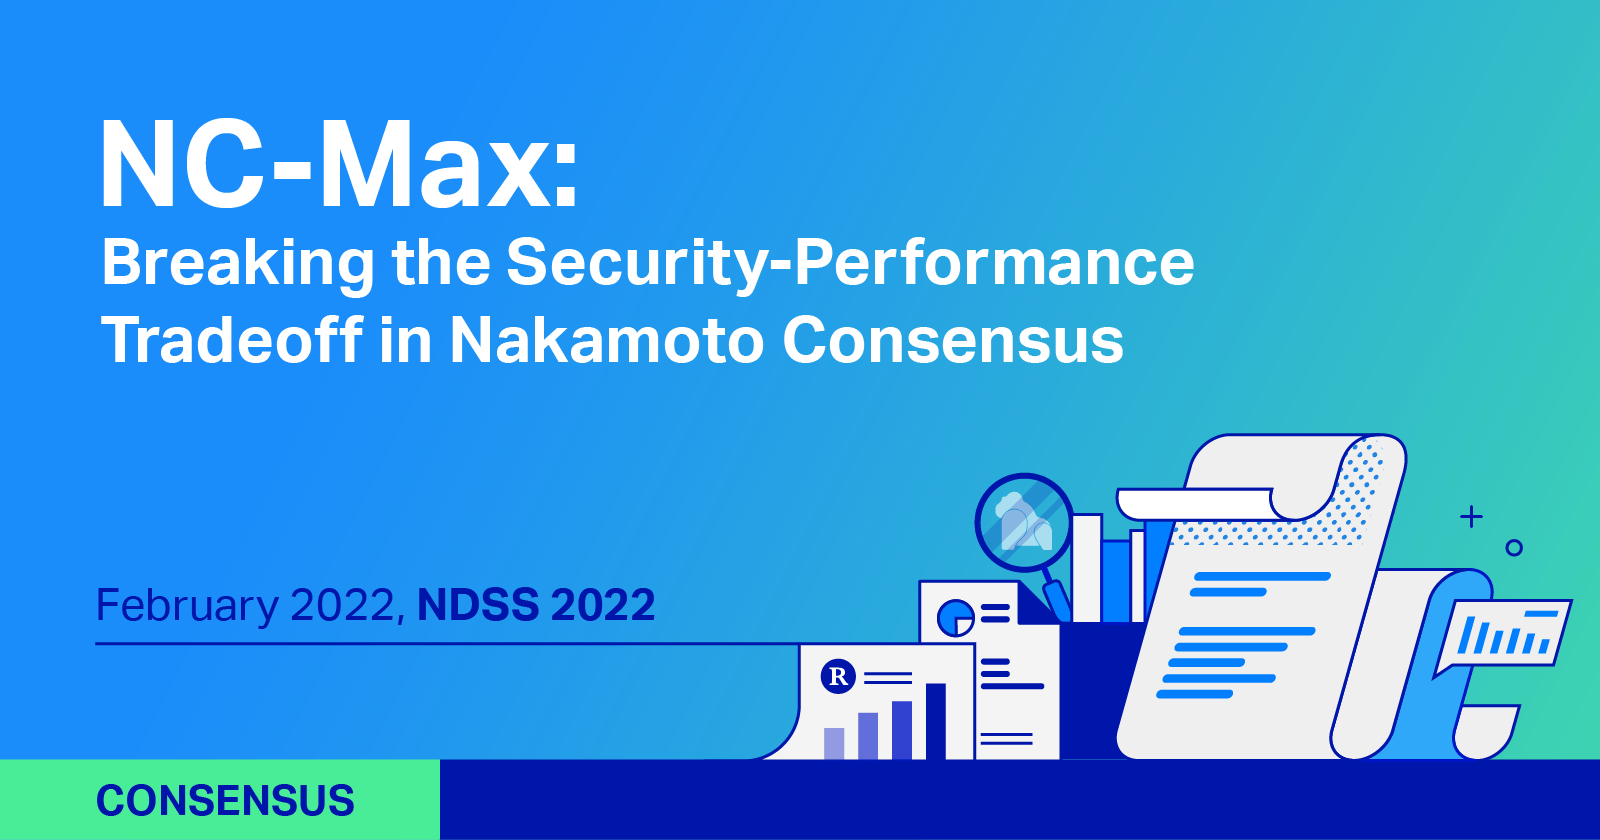 NC-Max: Breaking the Security-Performance Tradeoff in Nakamoto Consensus